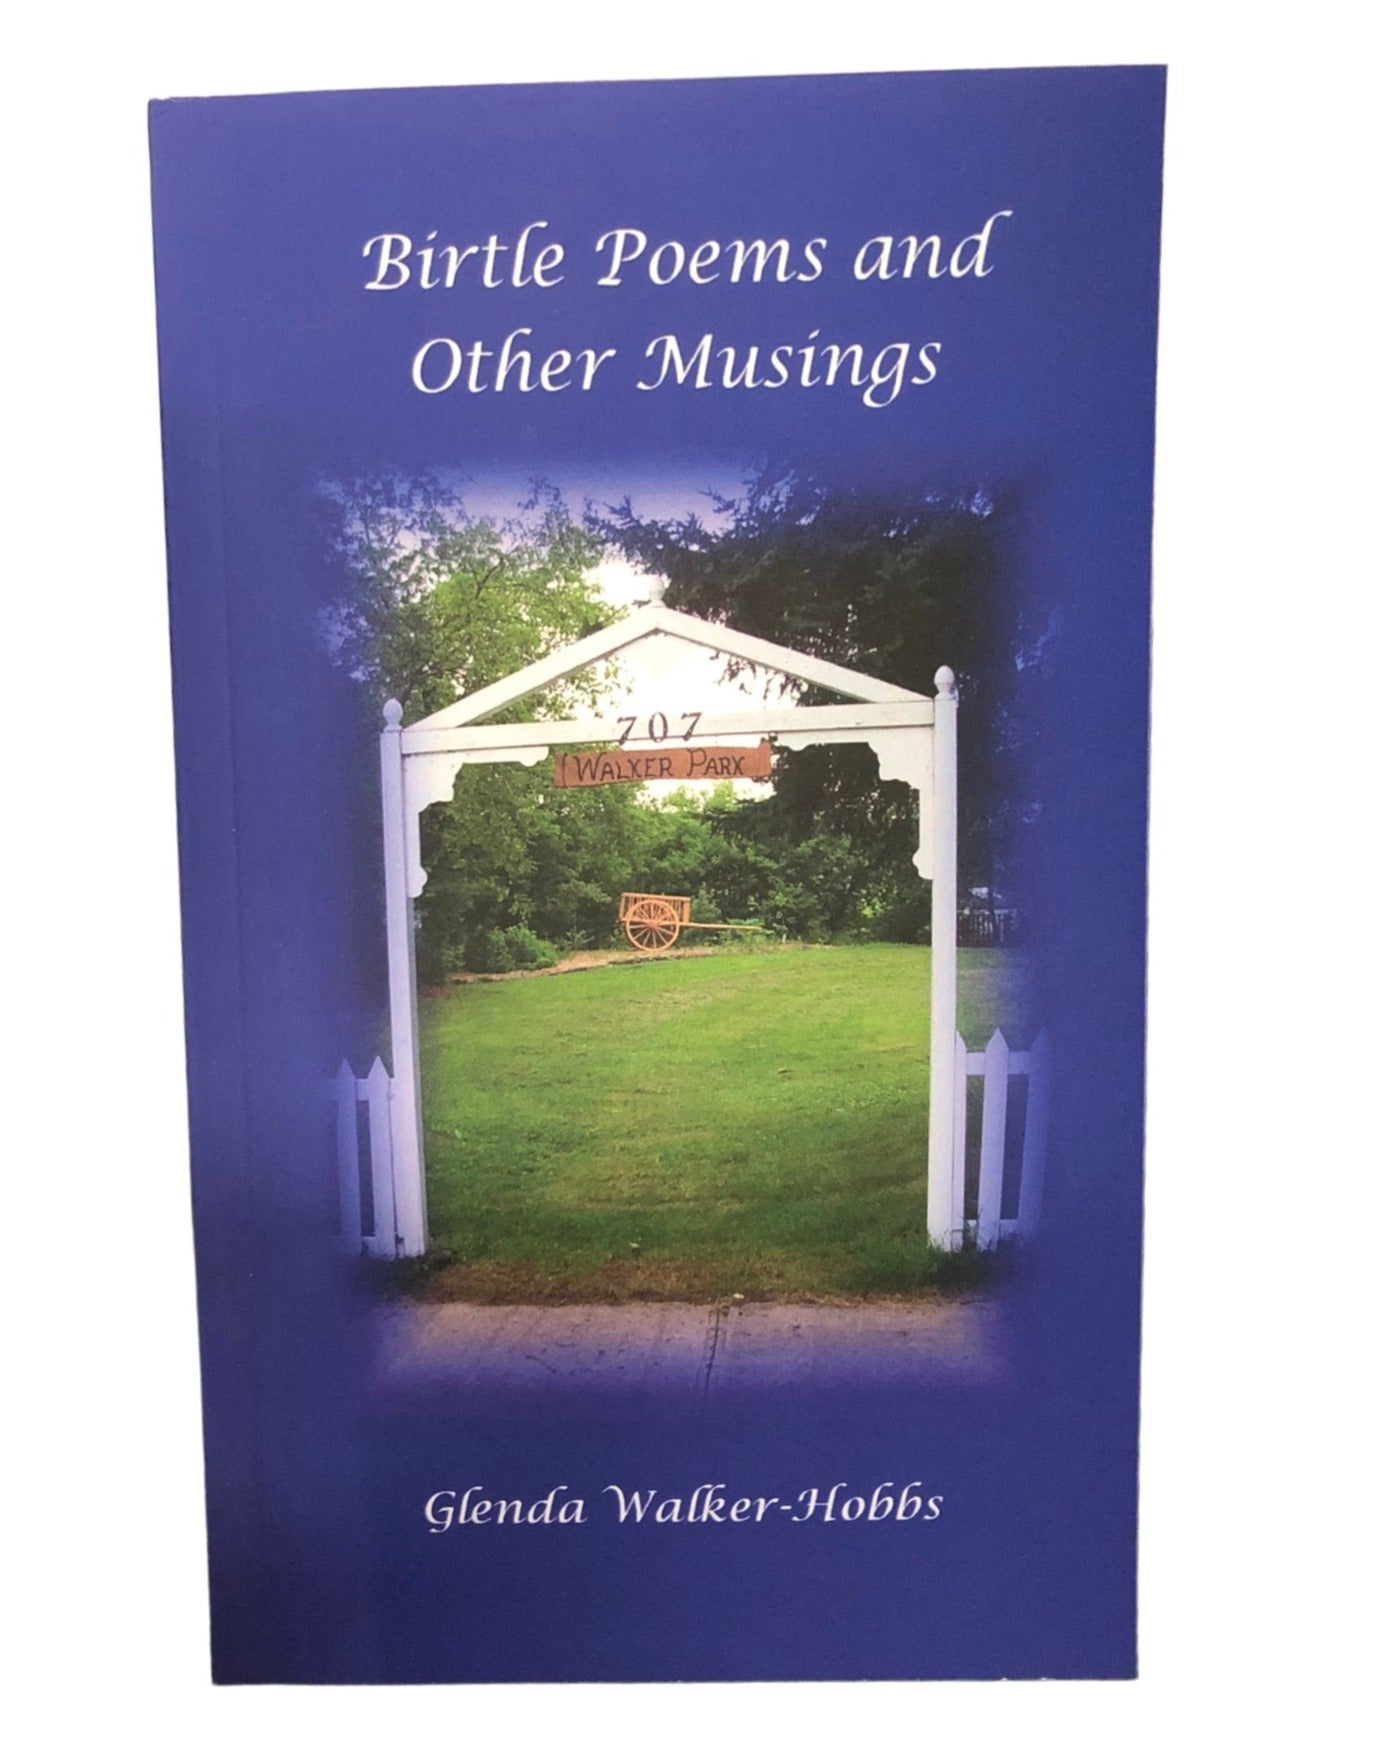 Birtle Poems and Other Musings